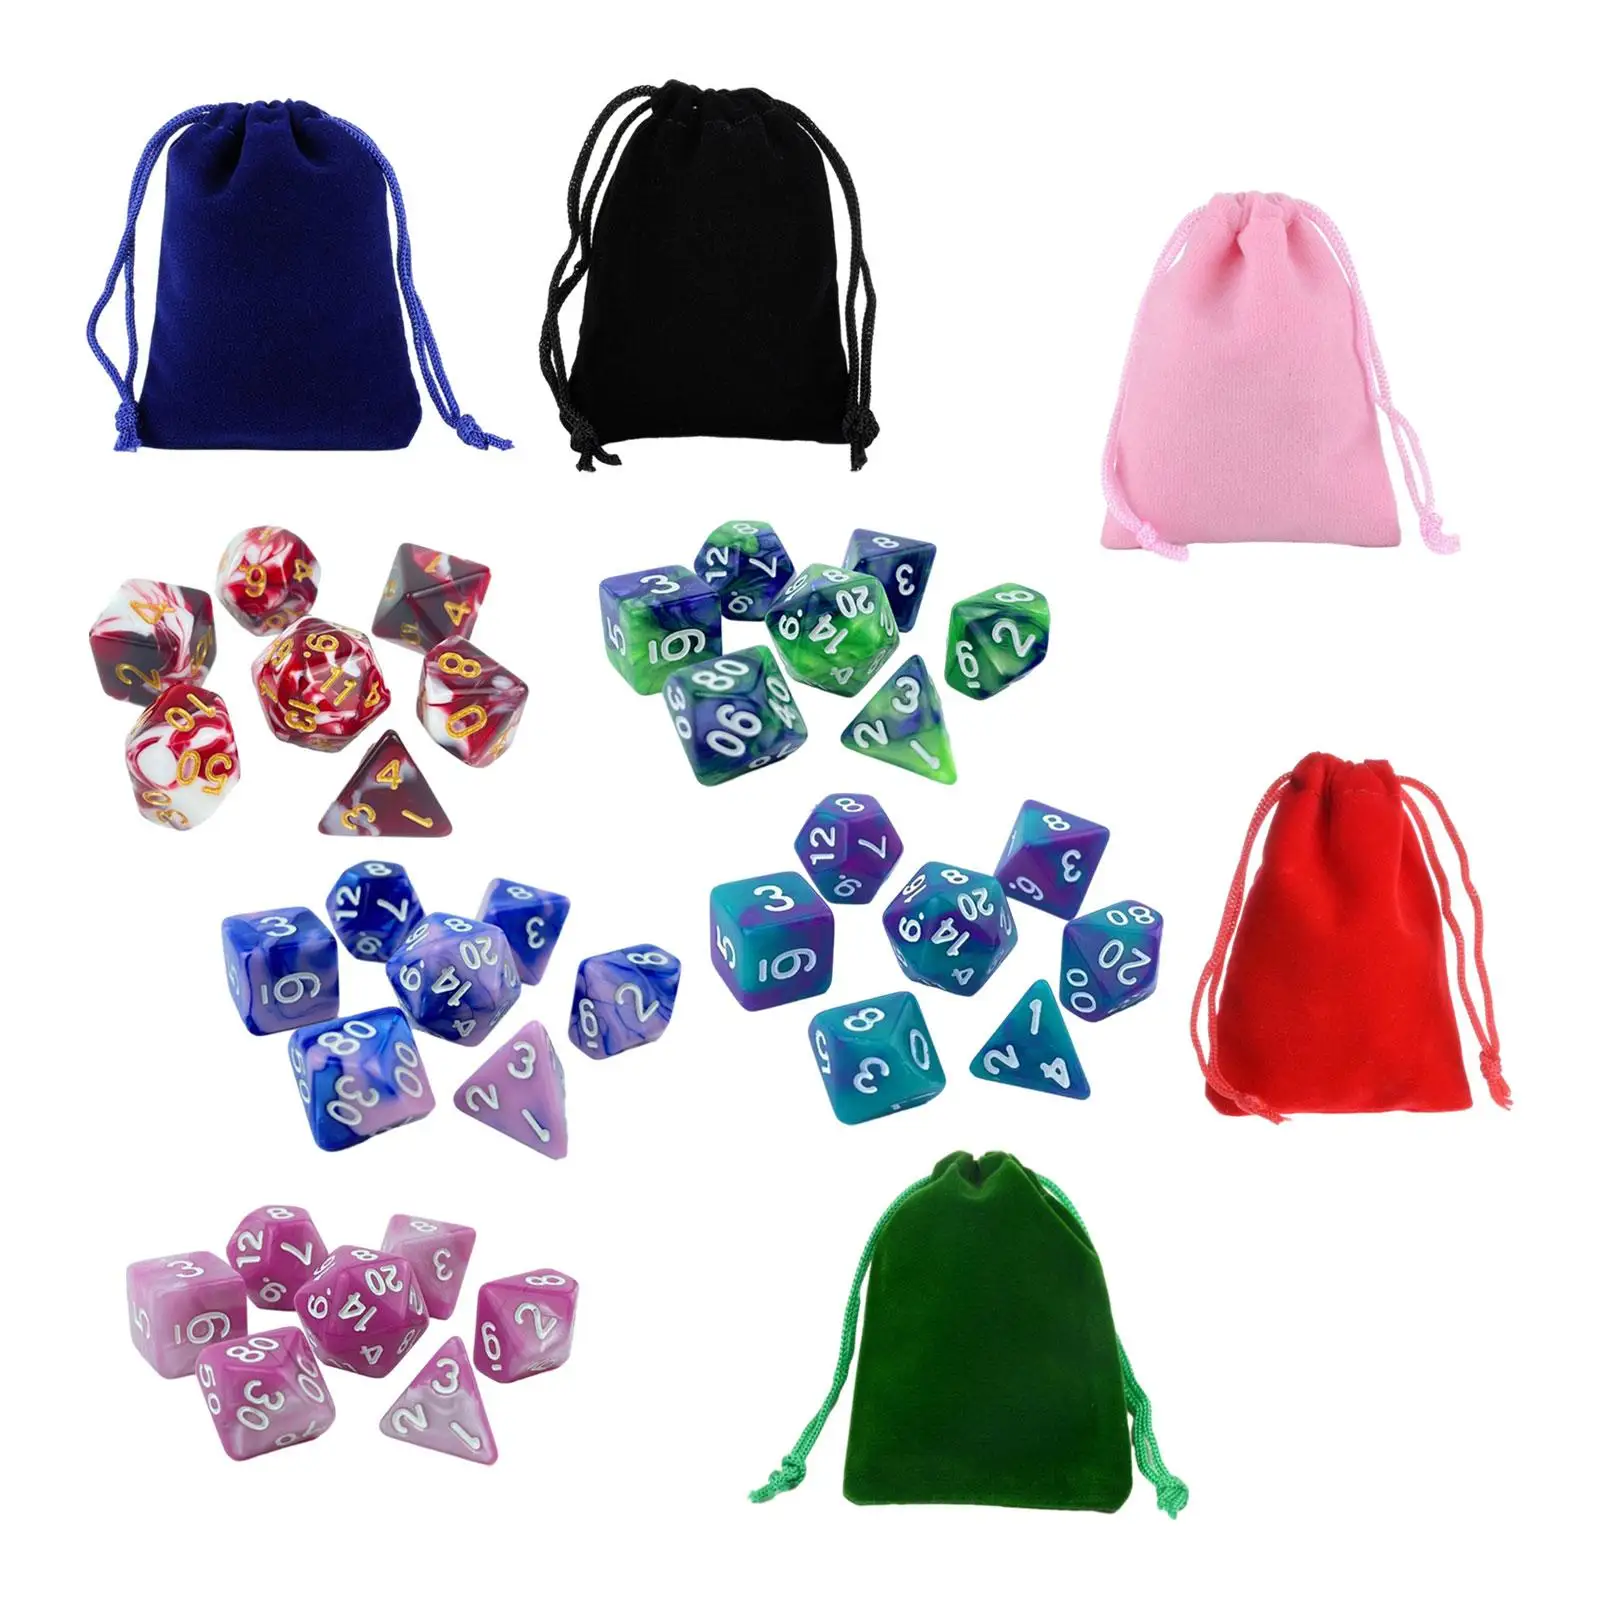 35x Polyhedral Dices Set with Drawstring Bags Family Table Game Family Games Accessaries for Party Supplies Wedding Cafe